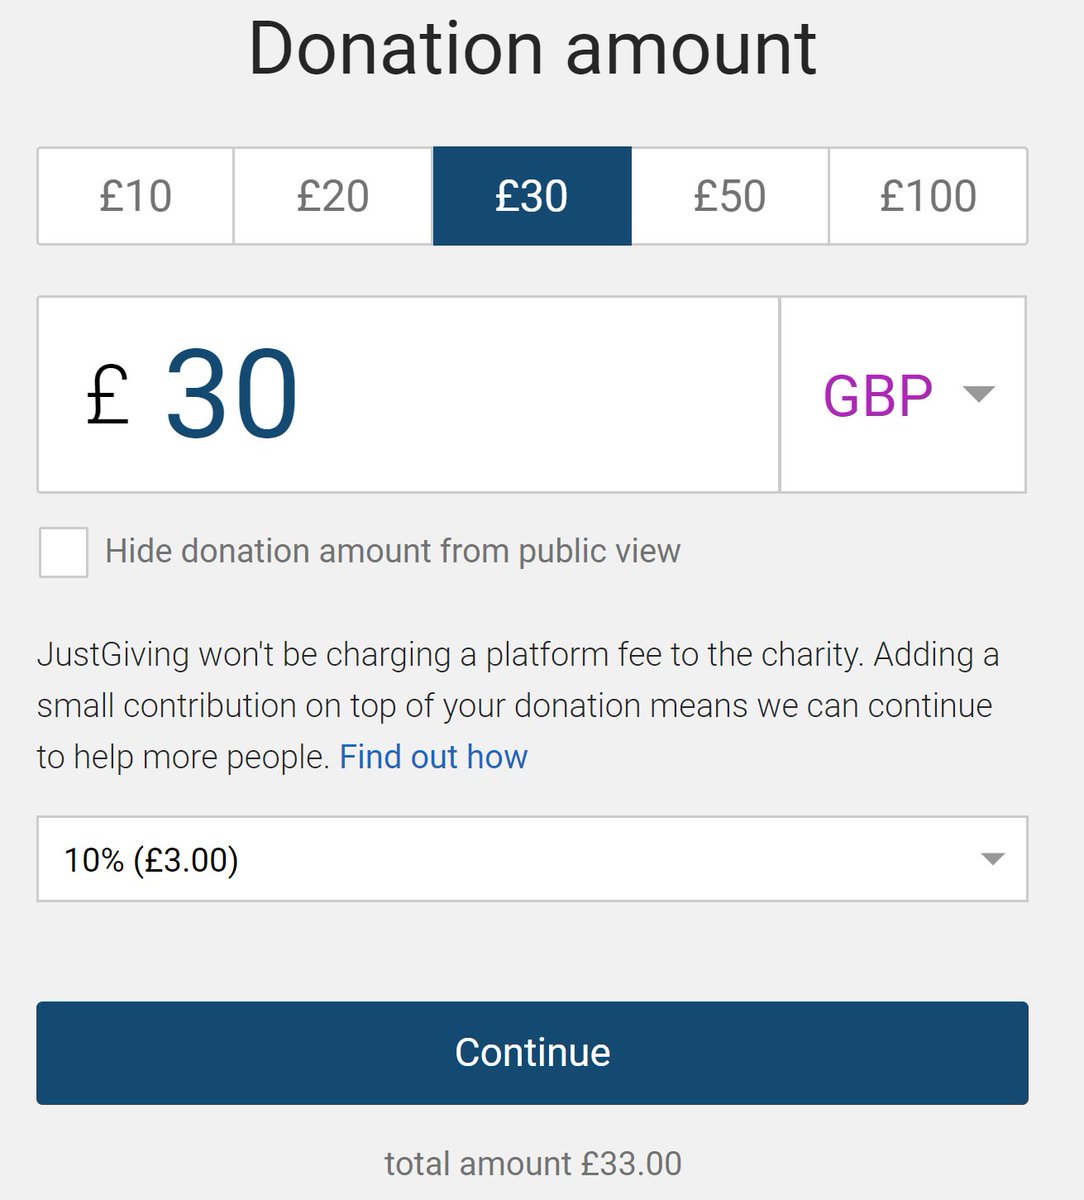 Here's the default donation amount, if you click through to donate. A couple of things to note there:- The donation amounts are set as buttons.- The 'optional contribution' to JustGiving is a dropdown, rather than buttons.- The 'optional contribution' is set to 10% by default.